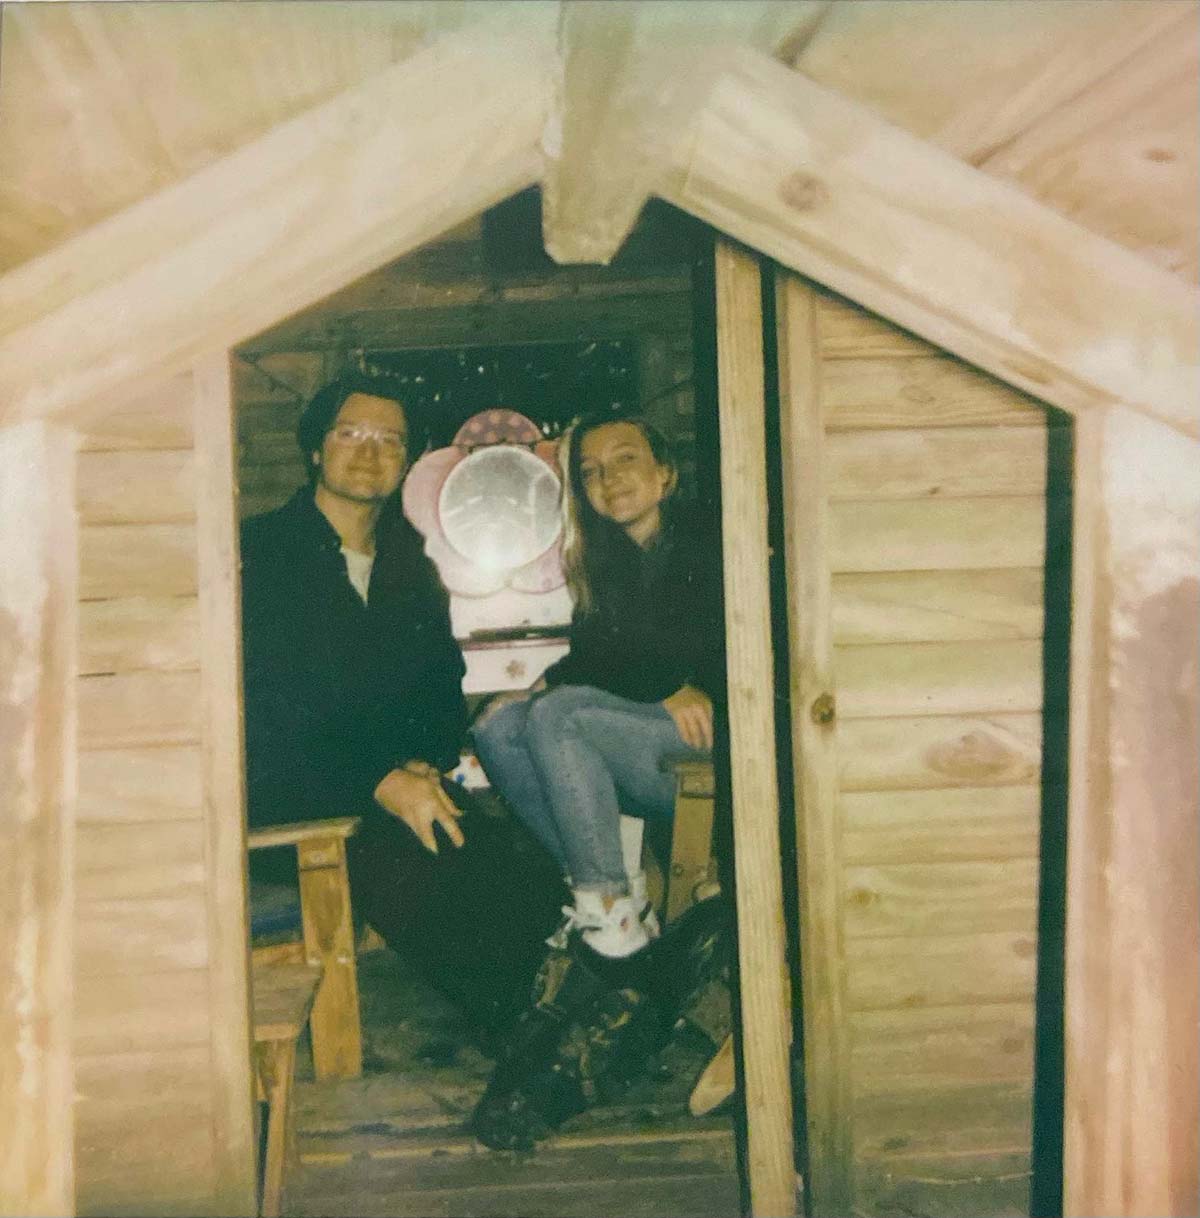 Tommy and Holyn Trautwein sitting in a small room with plain wooden walls